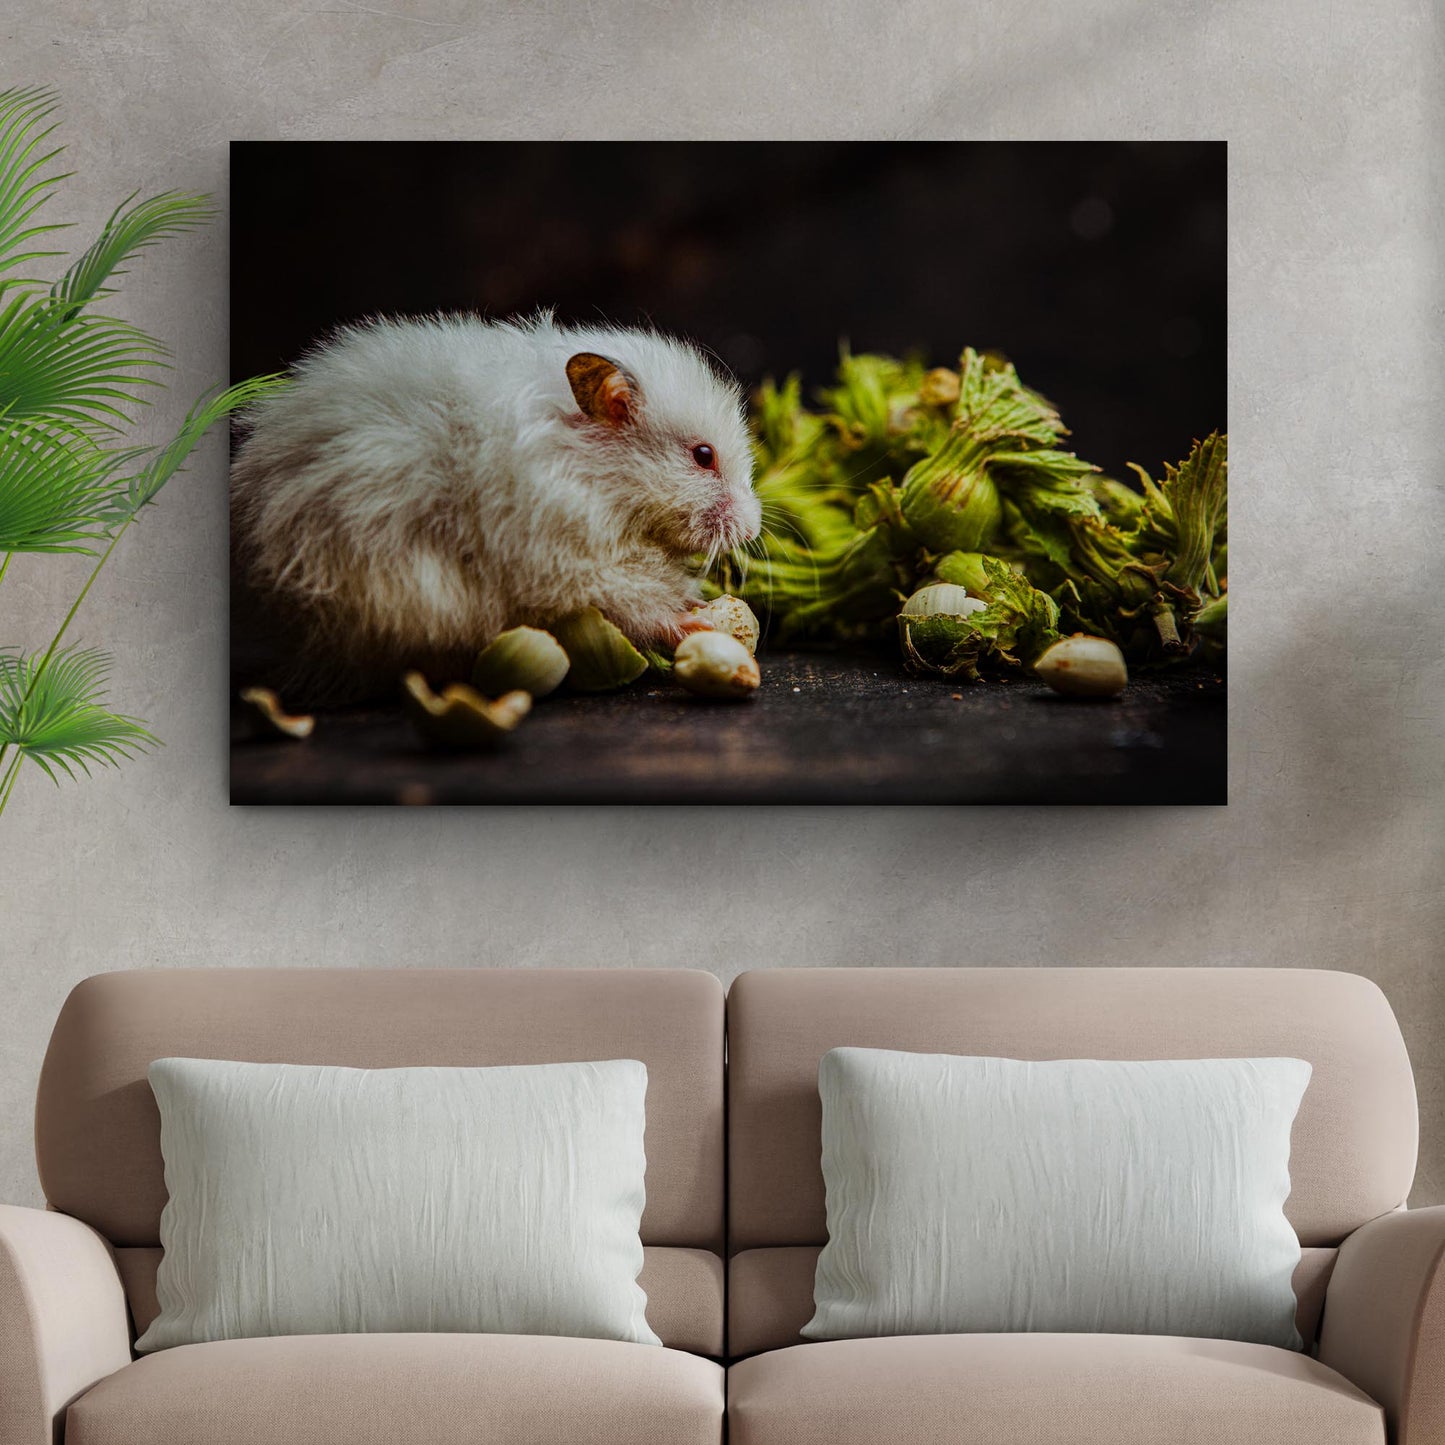 Eating Hamster Canvas Wall Art - Image by Tailored Canvases